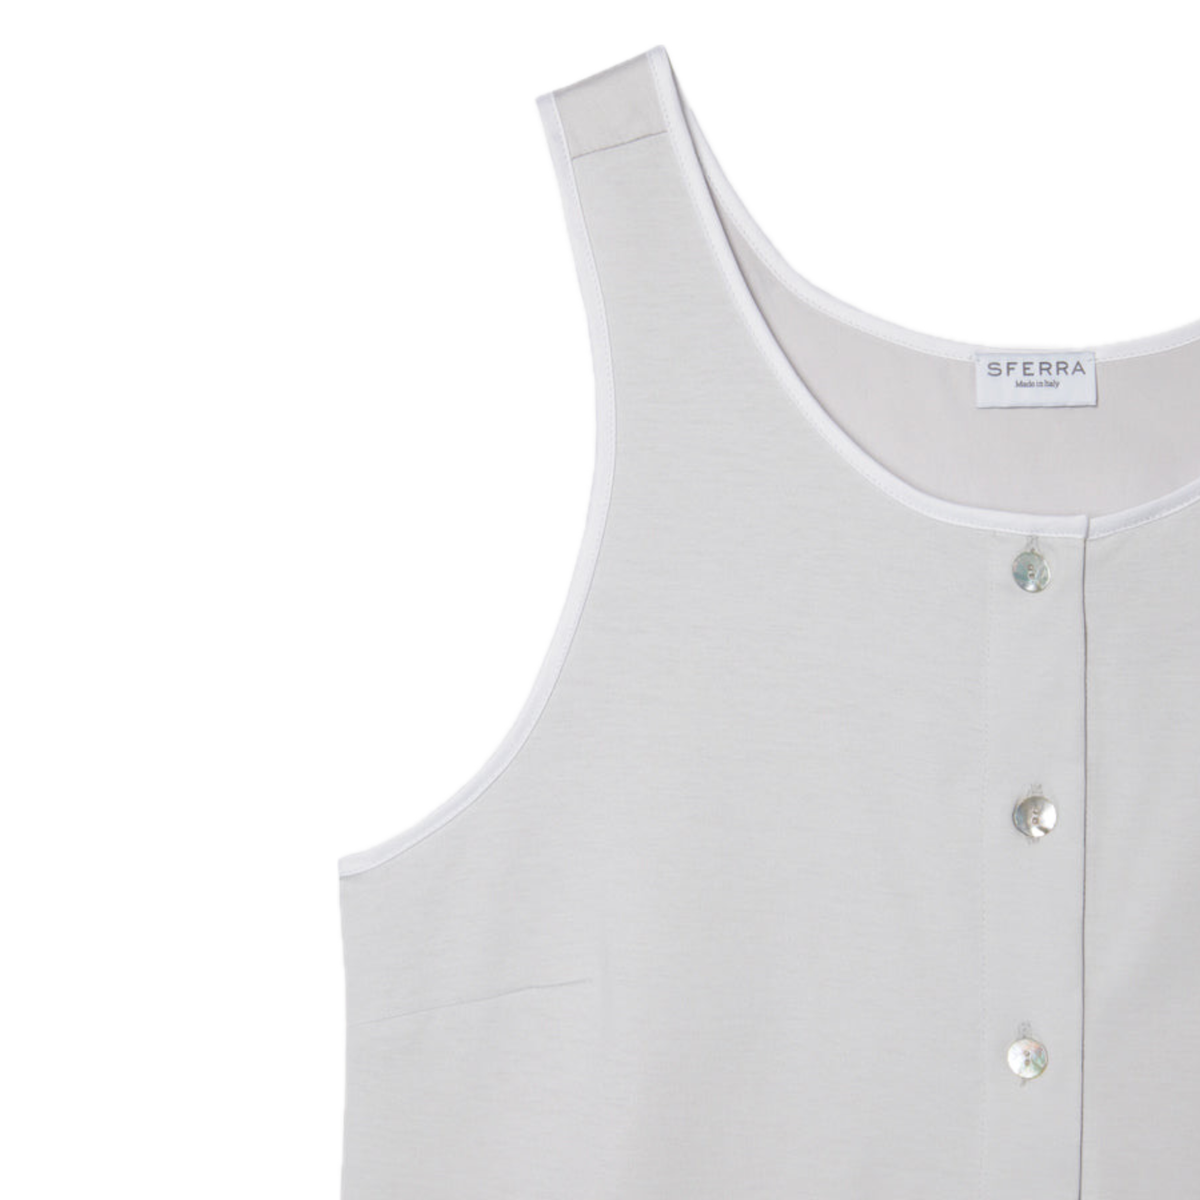 Corner View of Tin Sferra Caricia Buttoned Tank Top against a white background